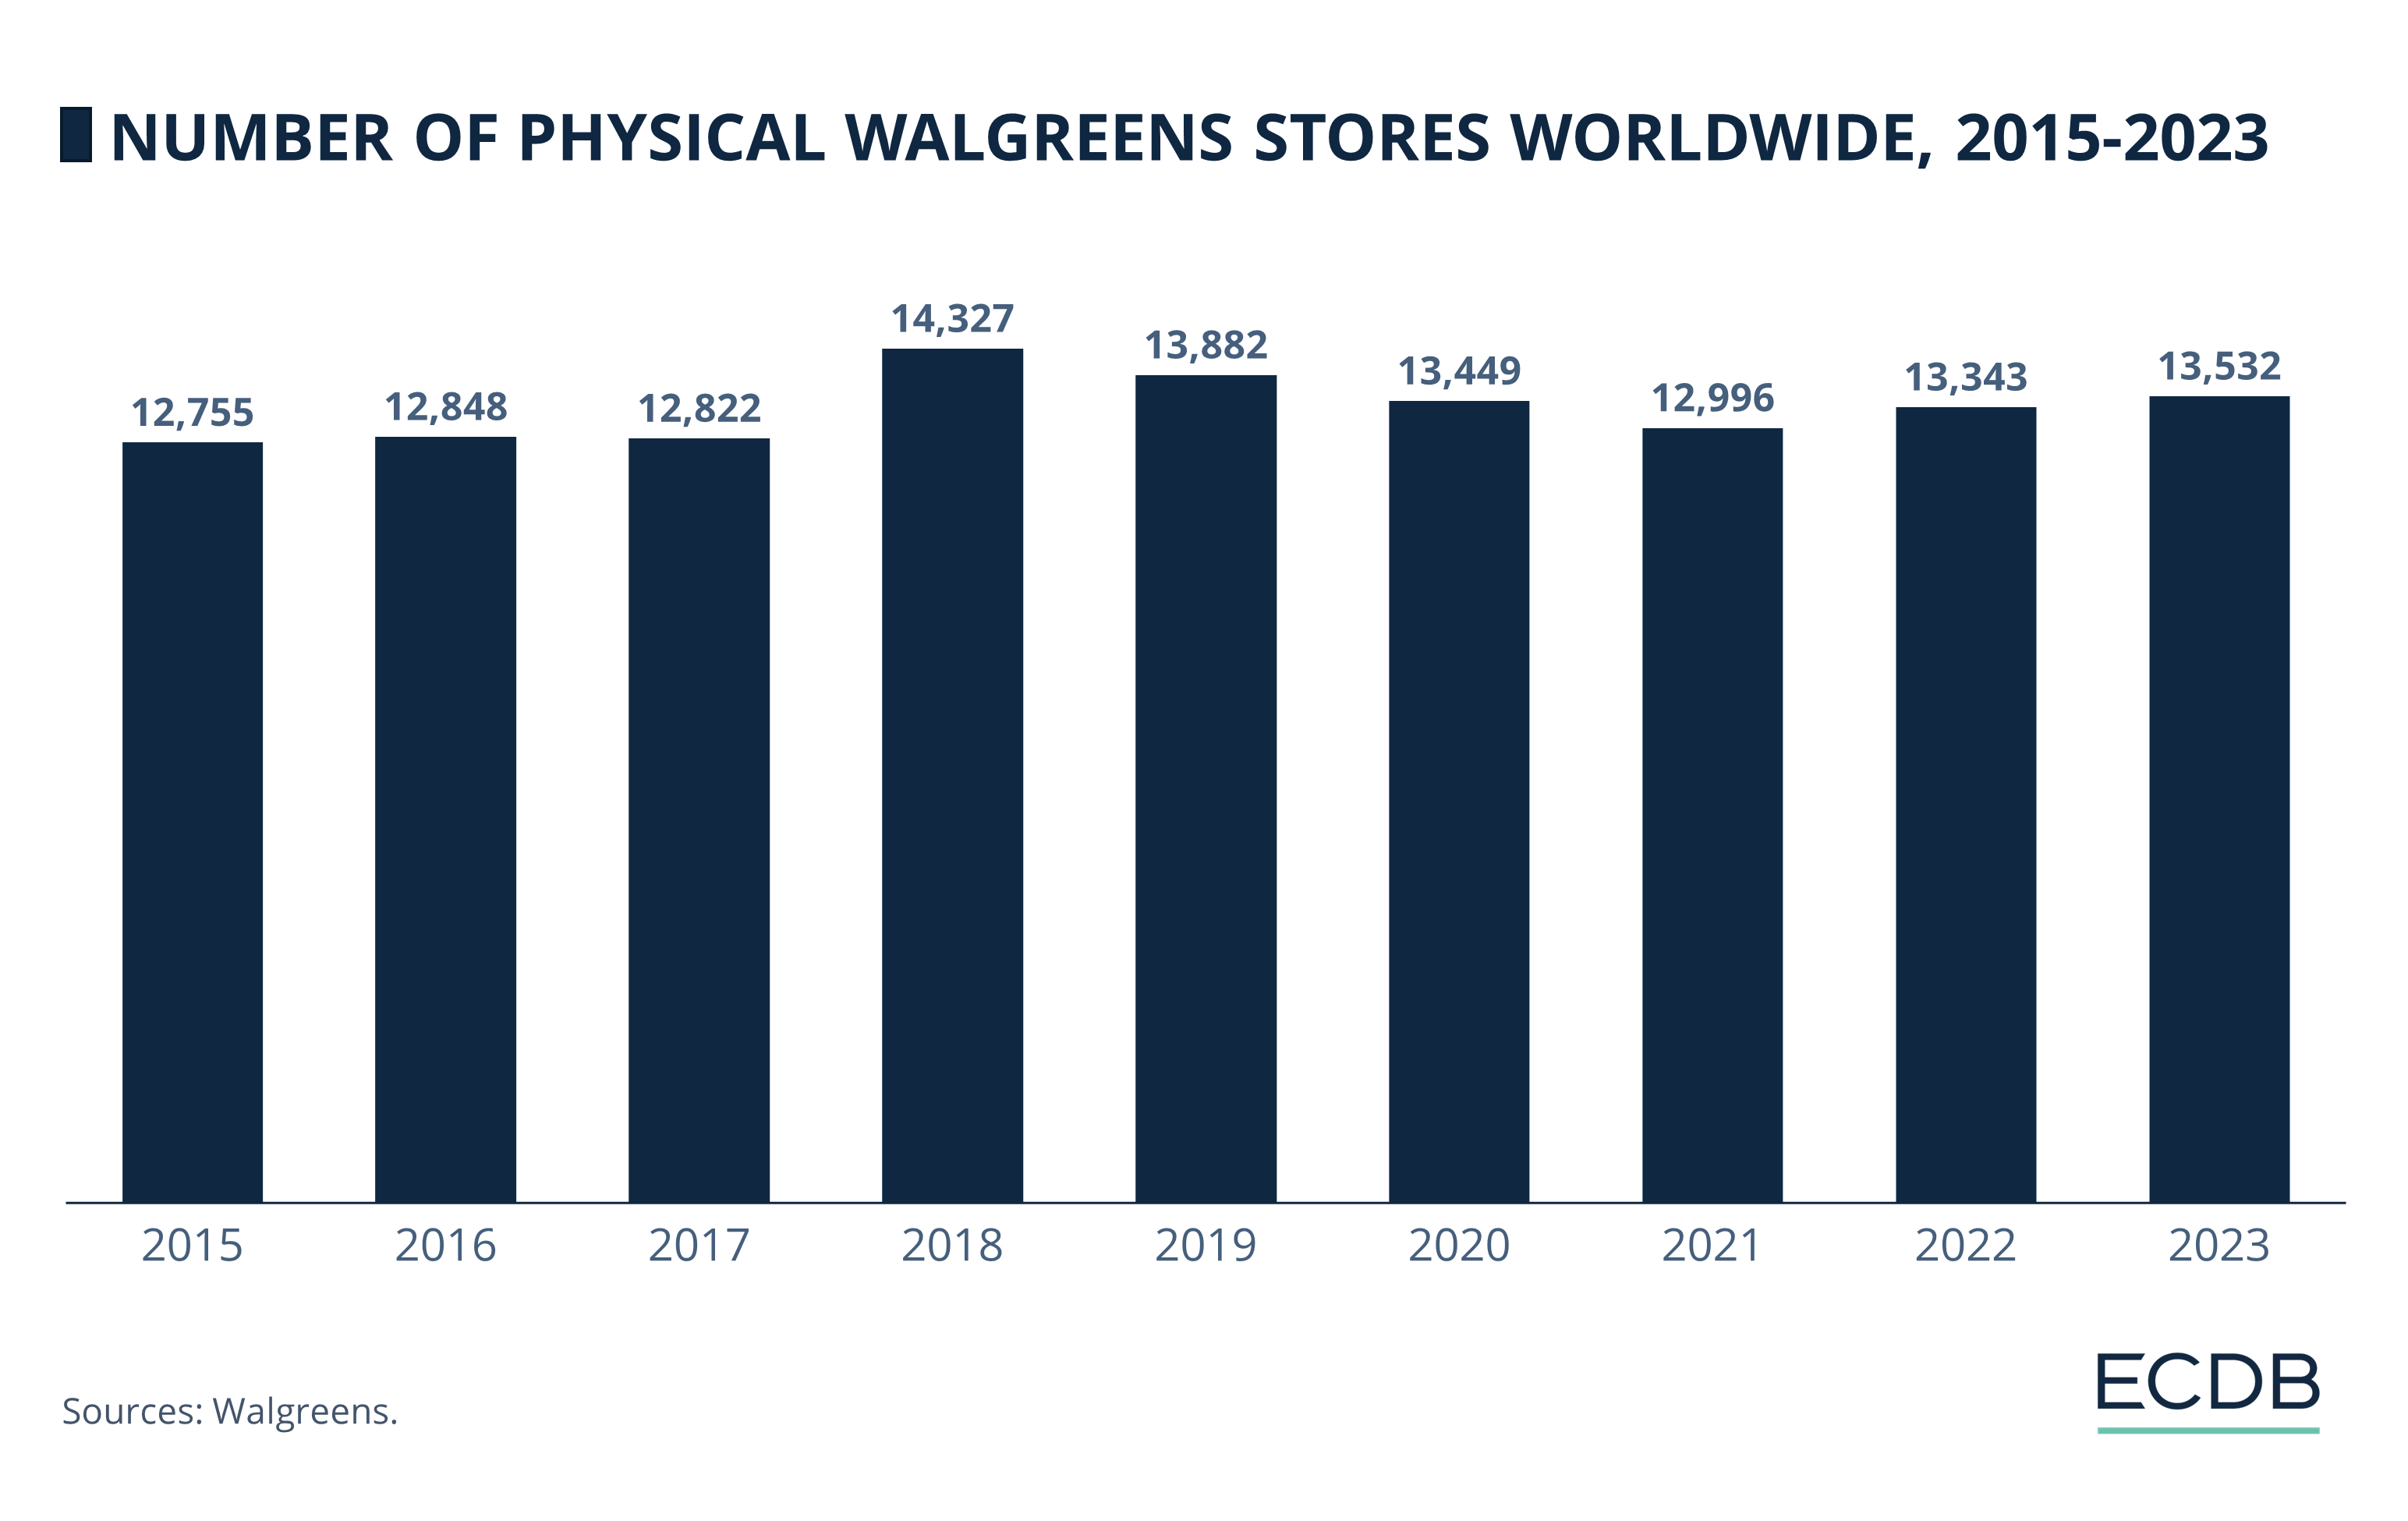 Number of Physical Walgreens Stores Worldwide, 2015-2023